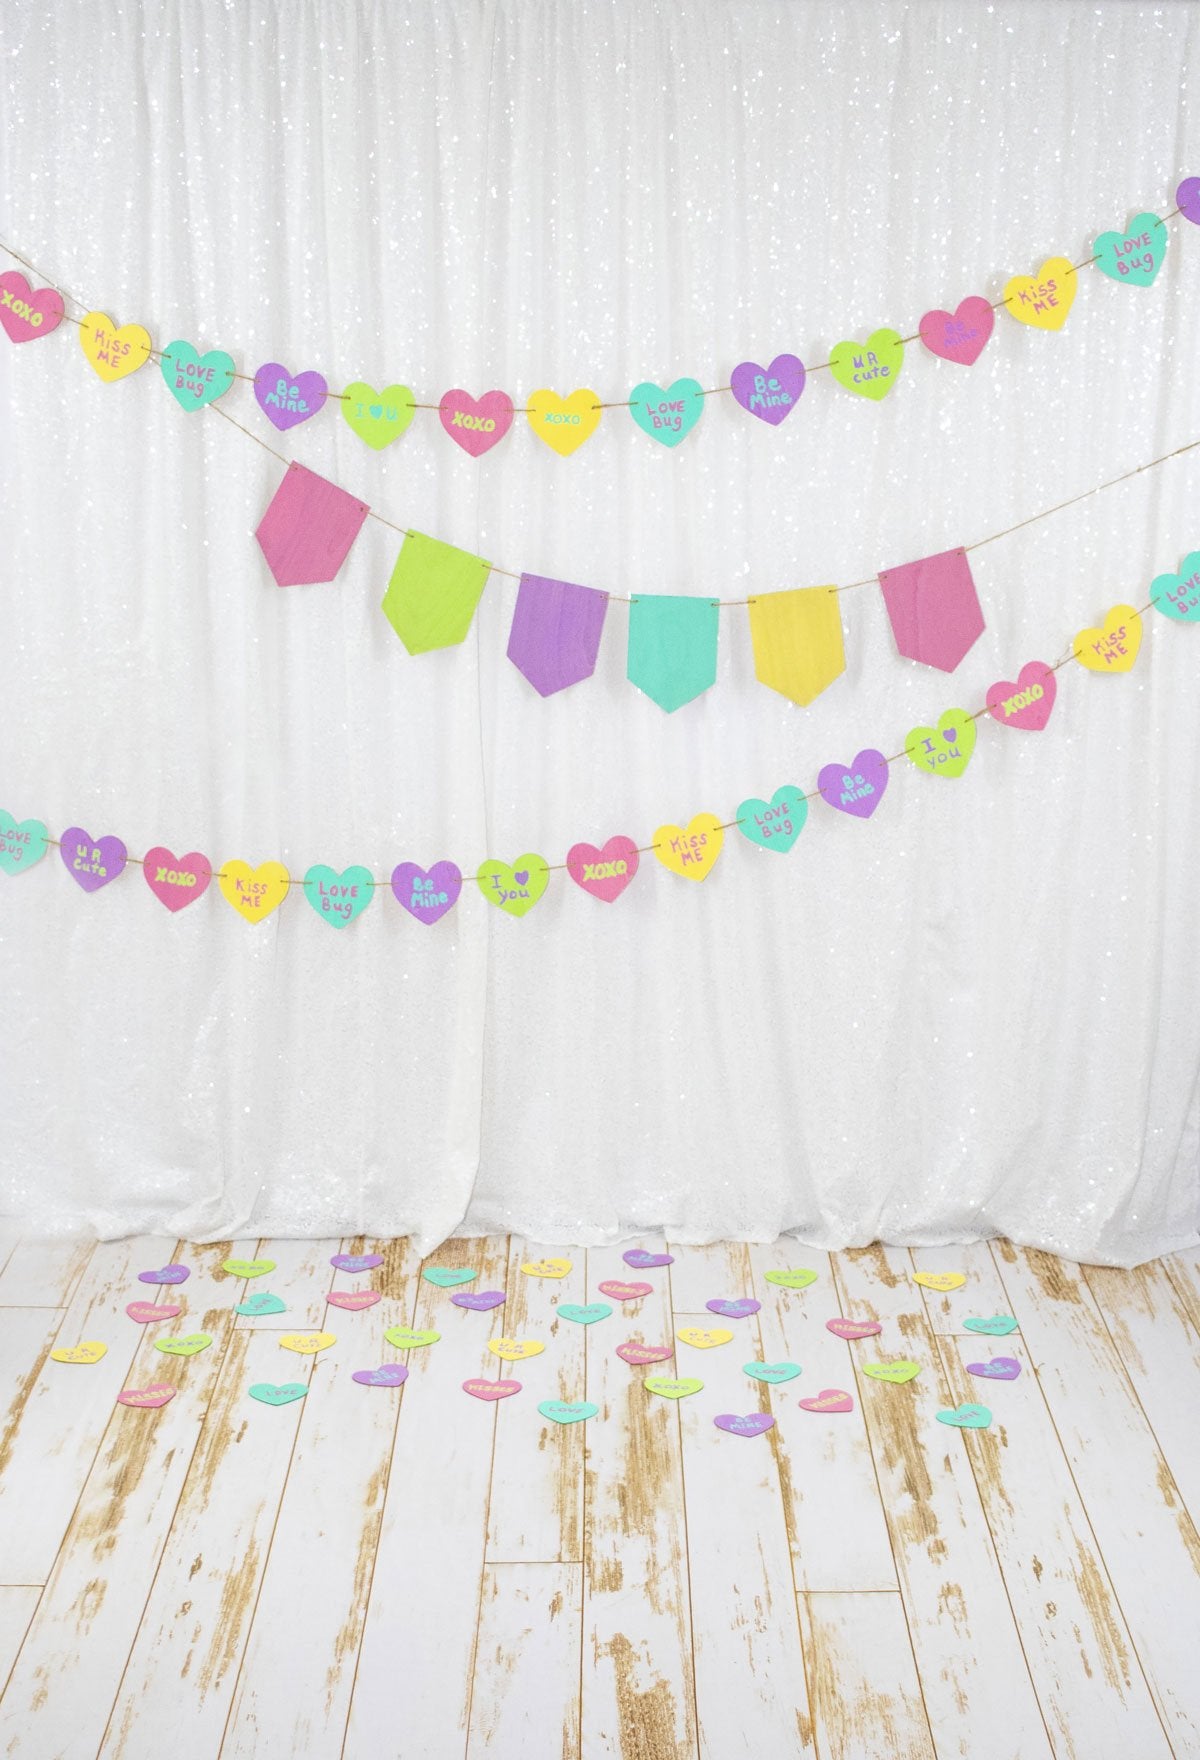 Kate White Curtain with Colored Banners Valentine's Day Backdrop Designed by Leann West